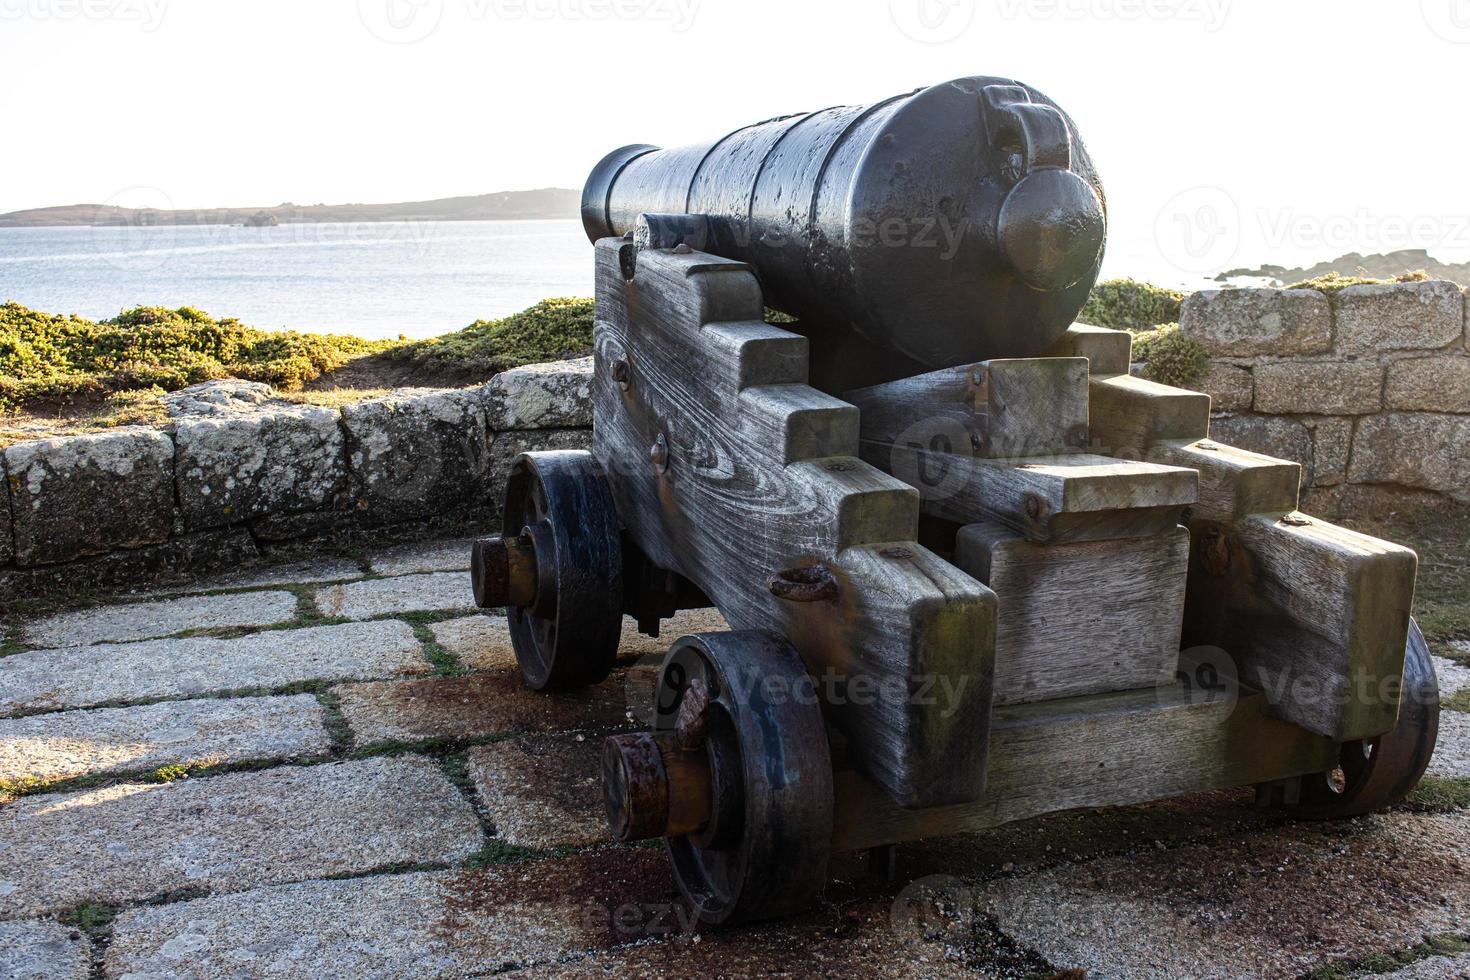 A cannon with a wooden carriage, on the defensive wall in the Scilly isles photo